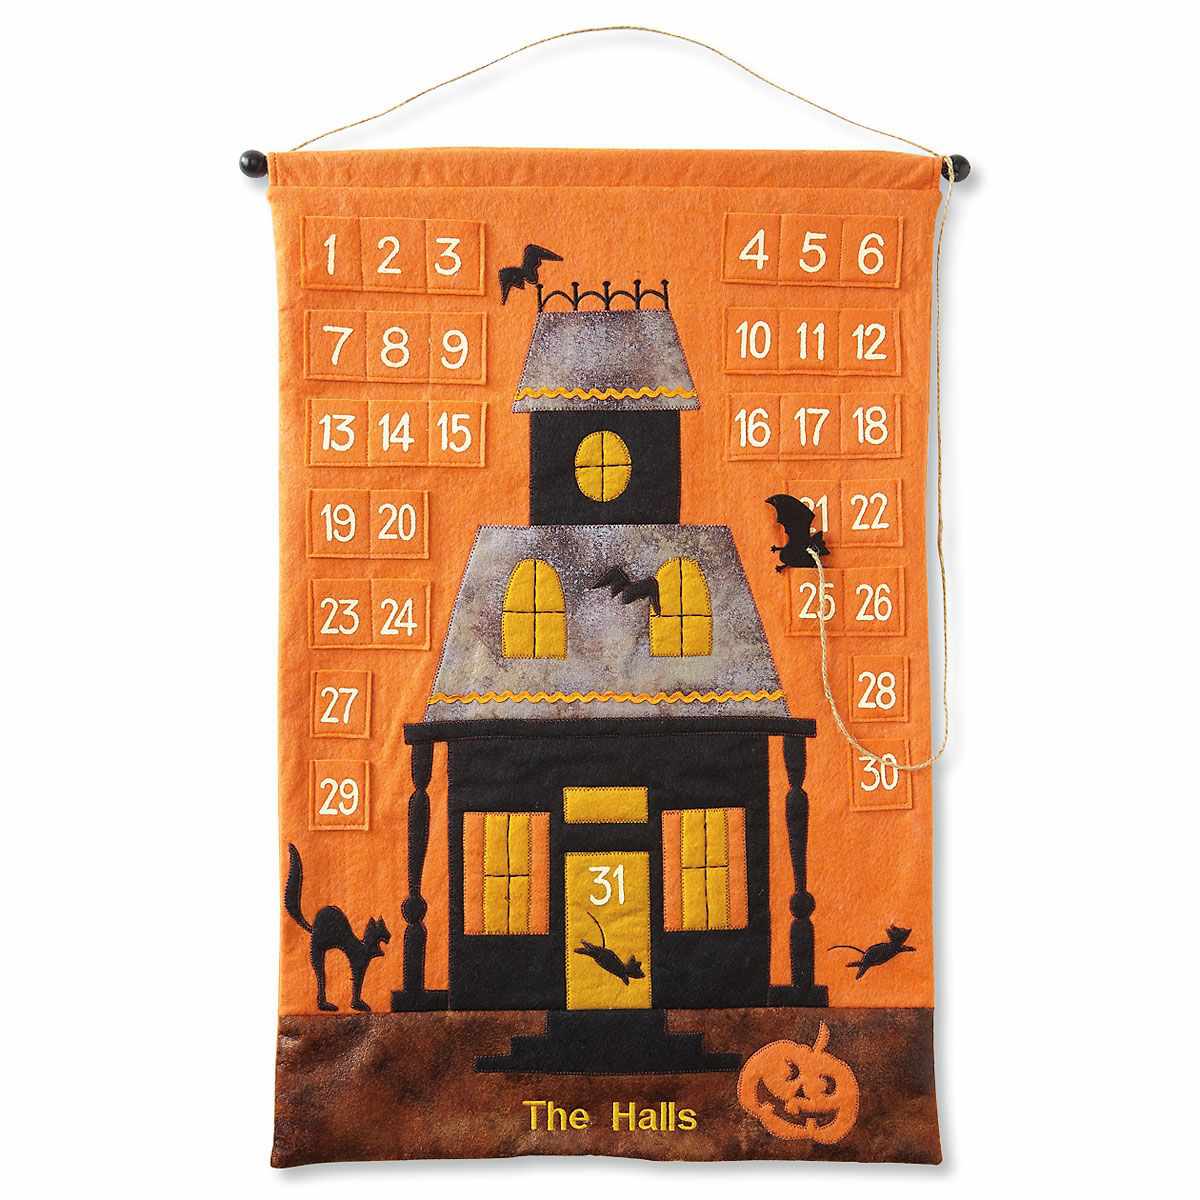 Orange felt wall hanging with 31 pockets and a haunted house design